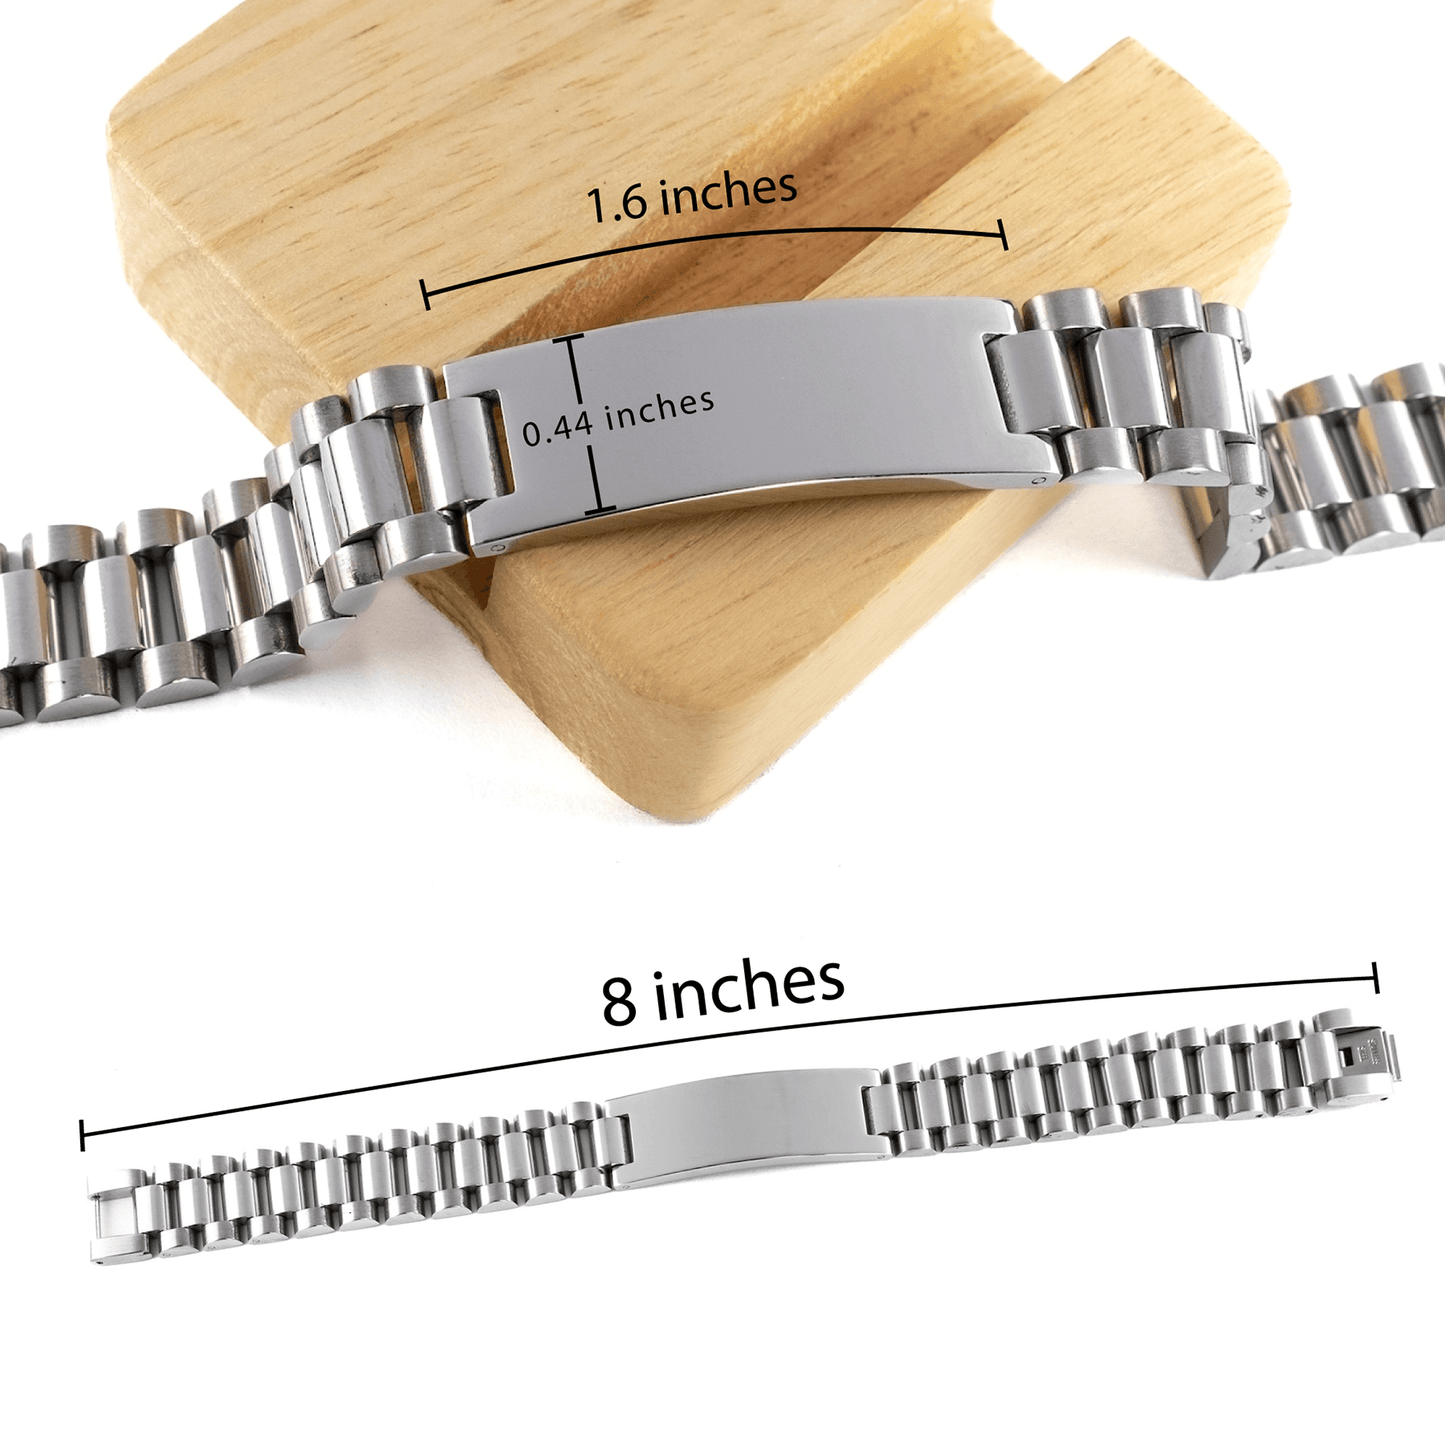 Little Brother Gifts, To My Little Brother Remember, you will never lose. You will either WIN or LEARN, Keepsake Ladder Stainless Steel Bracelet For Little Brother Engraved, Birthday Christmas Gifts Ideas For Little Brother X-mas Gifts